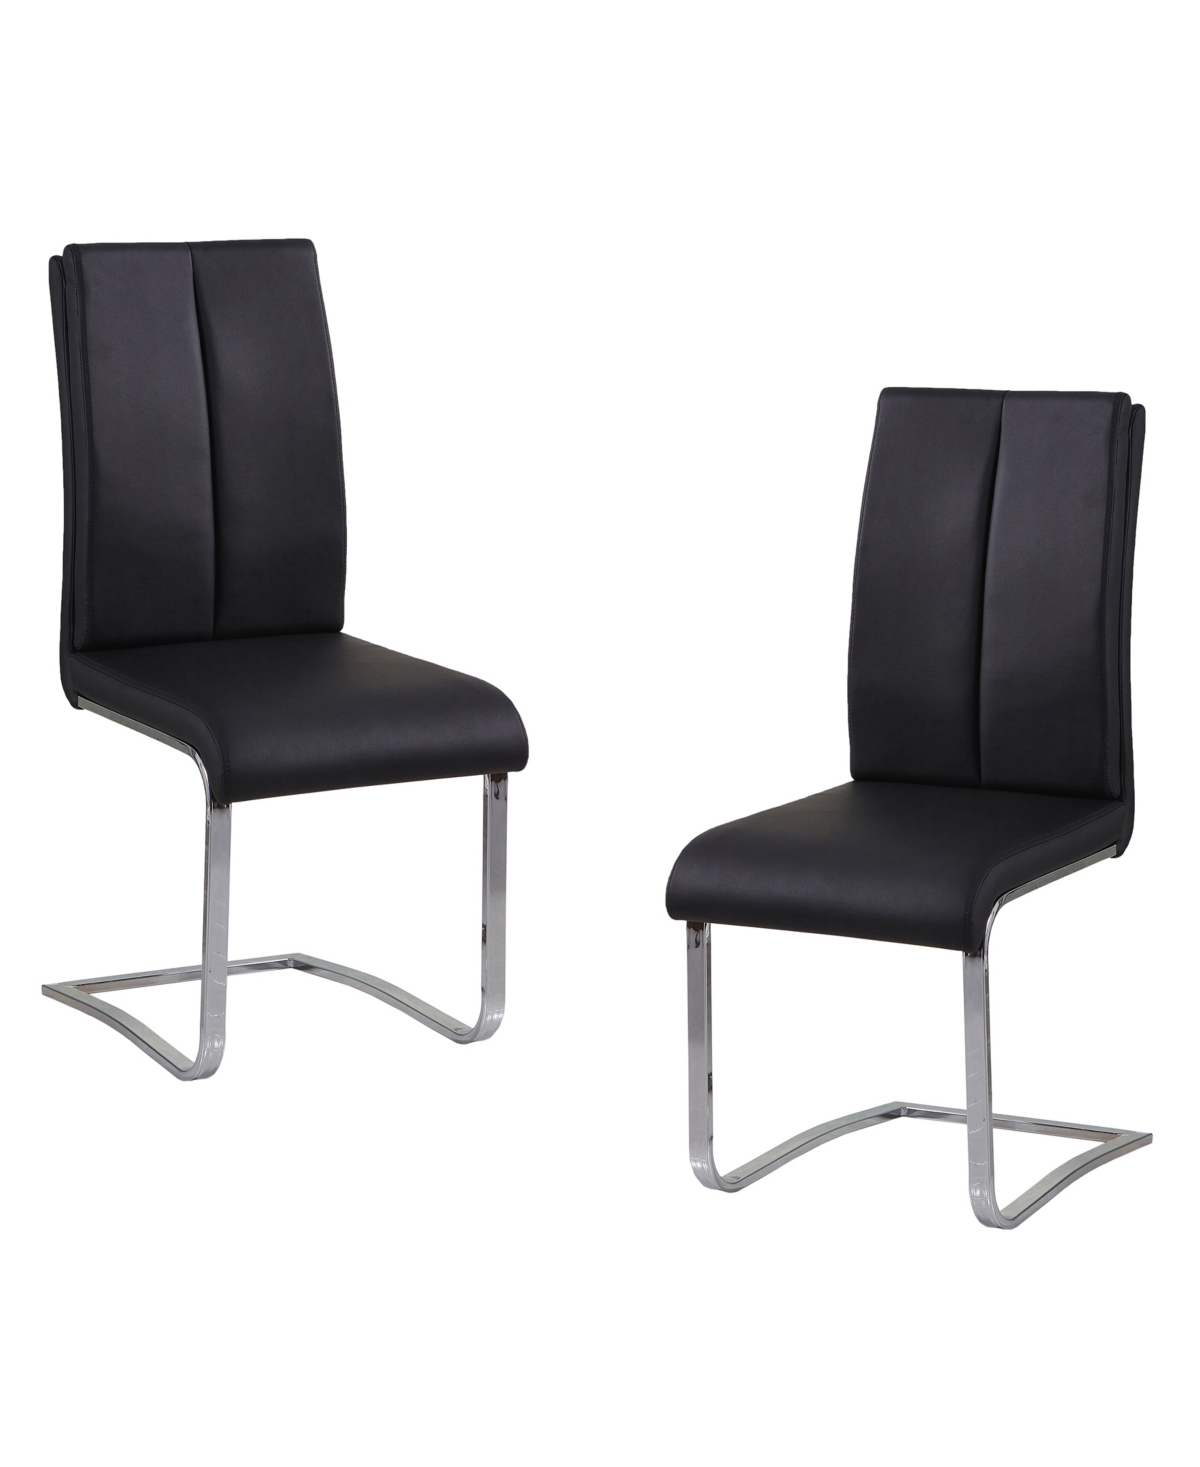 England Modern Faux Leather with Chrome Dining Side Chairs, Set of 2